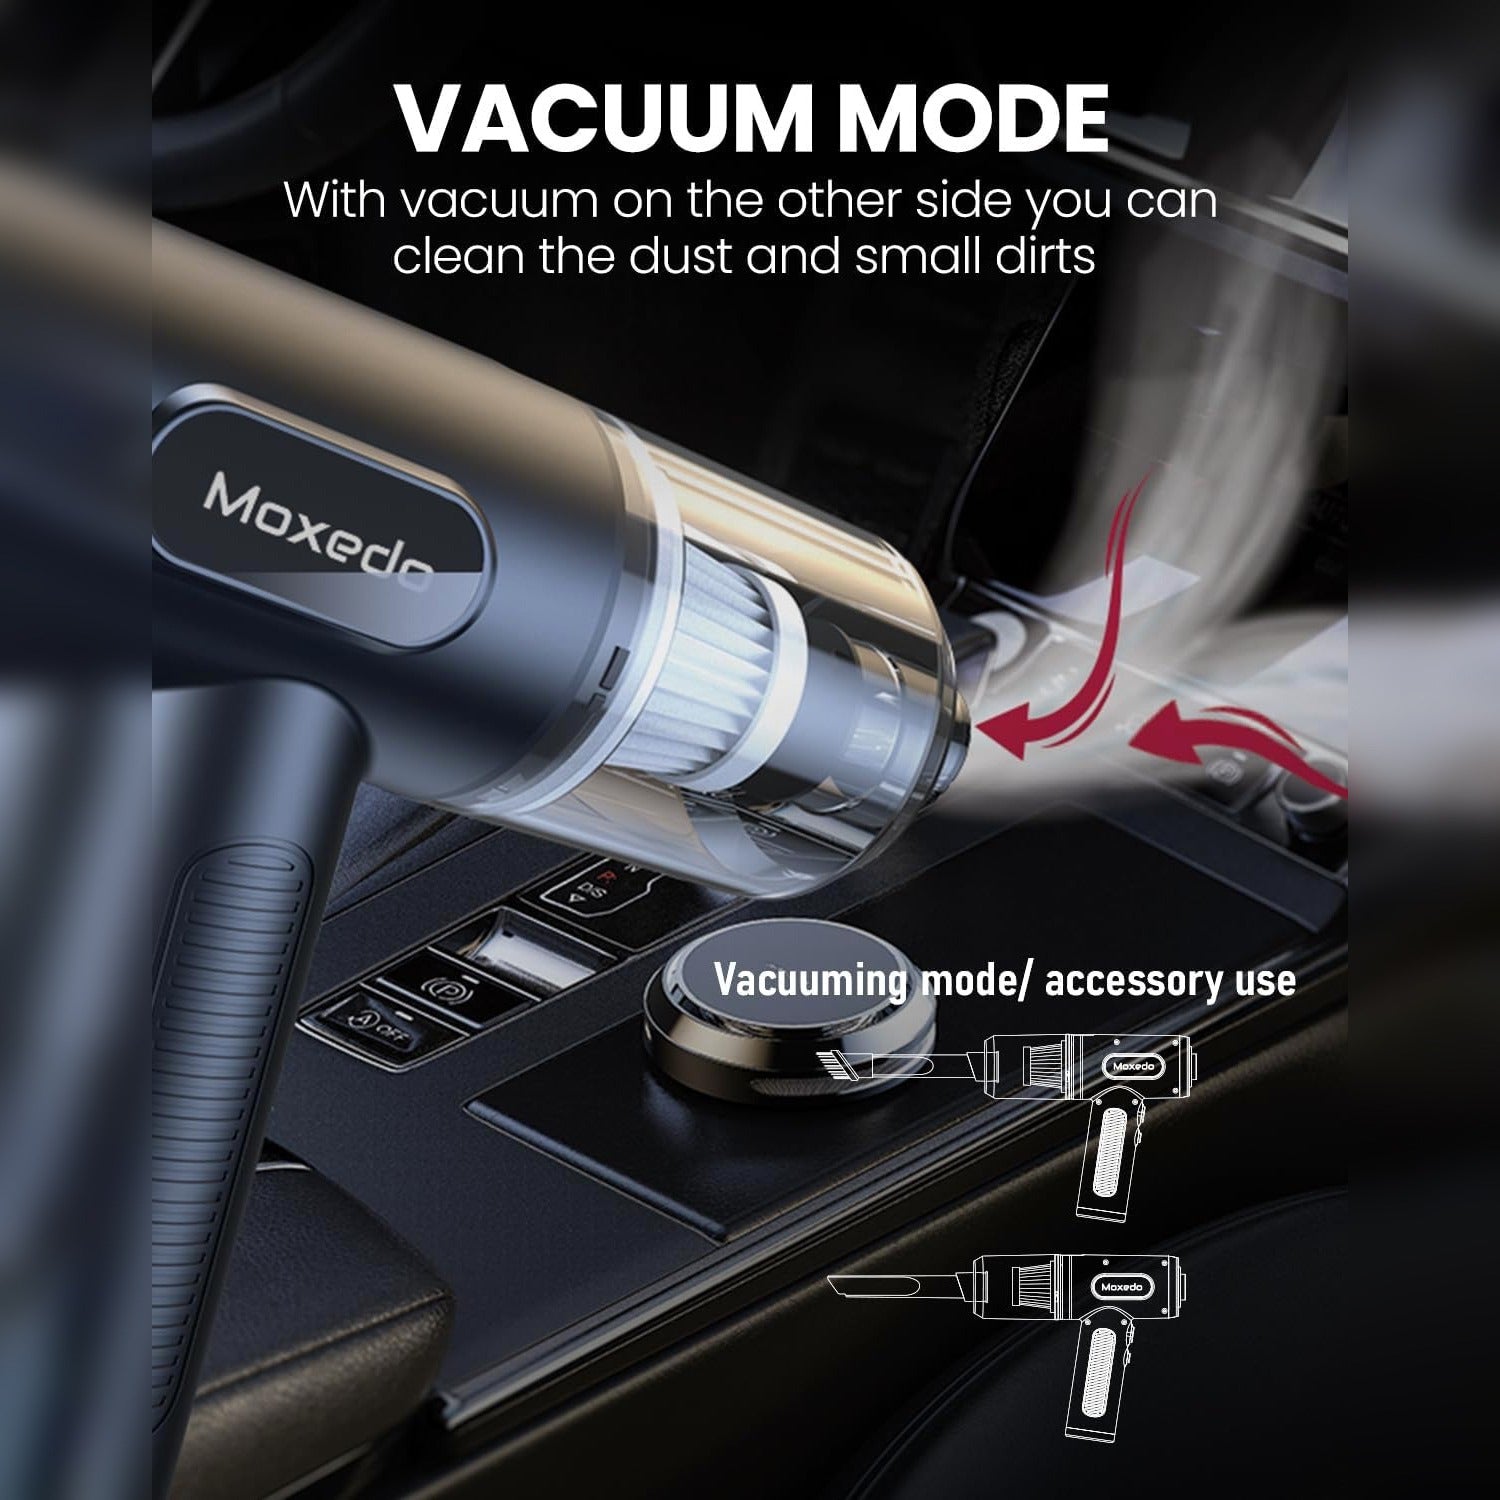 vacuum mode of 2 in 1 Cordless Air Duster